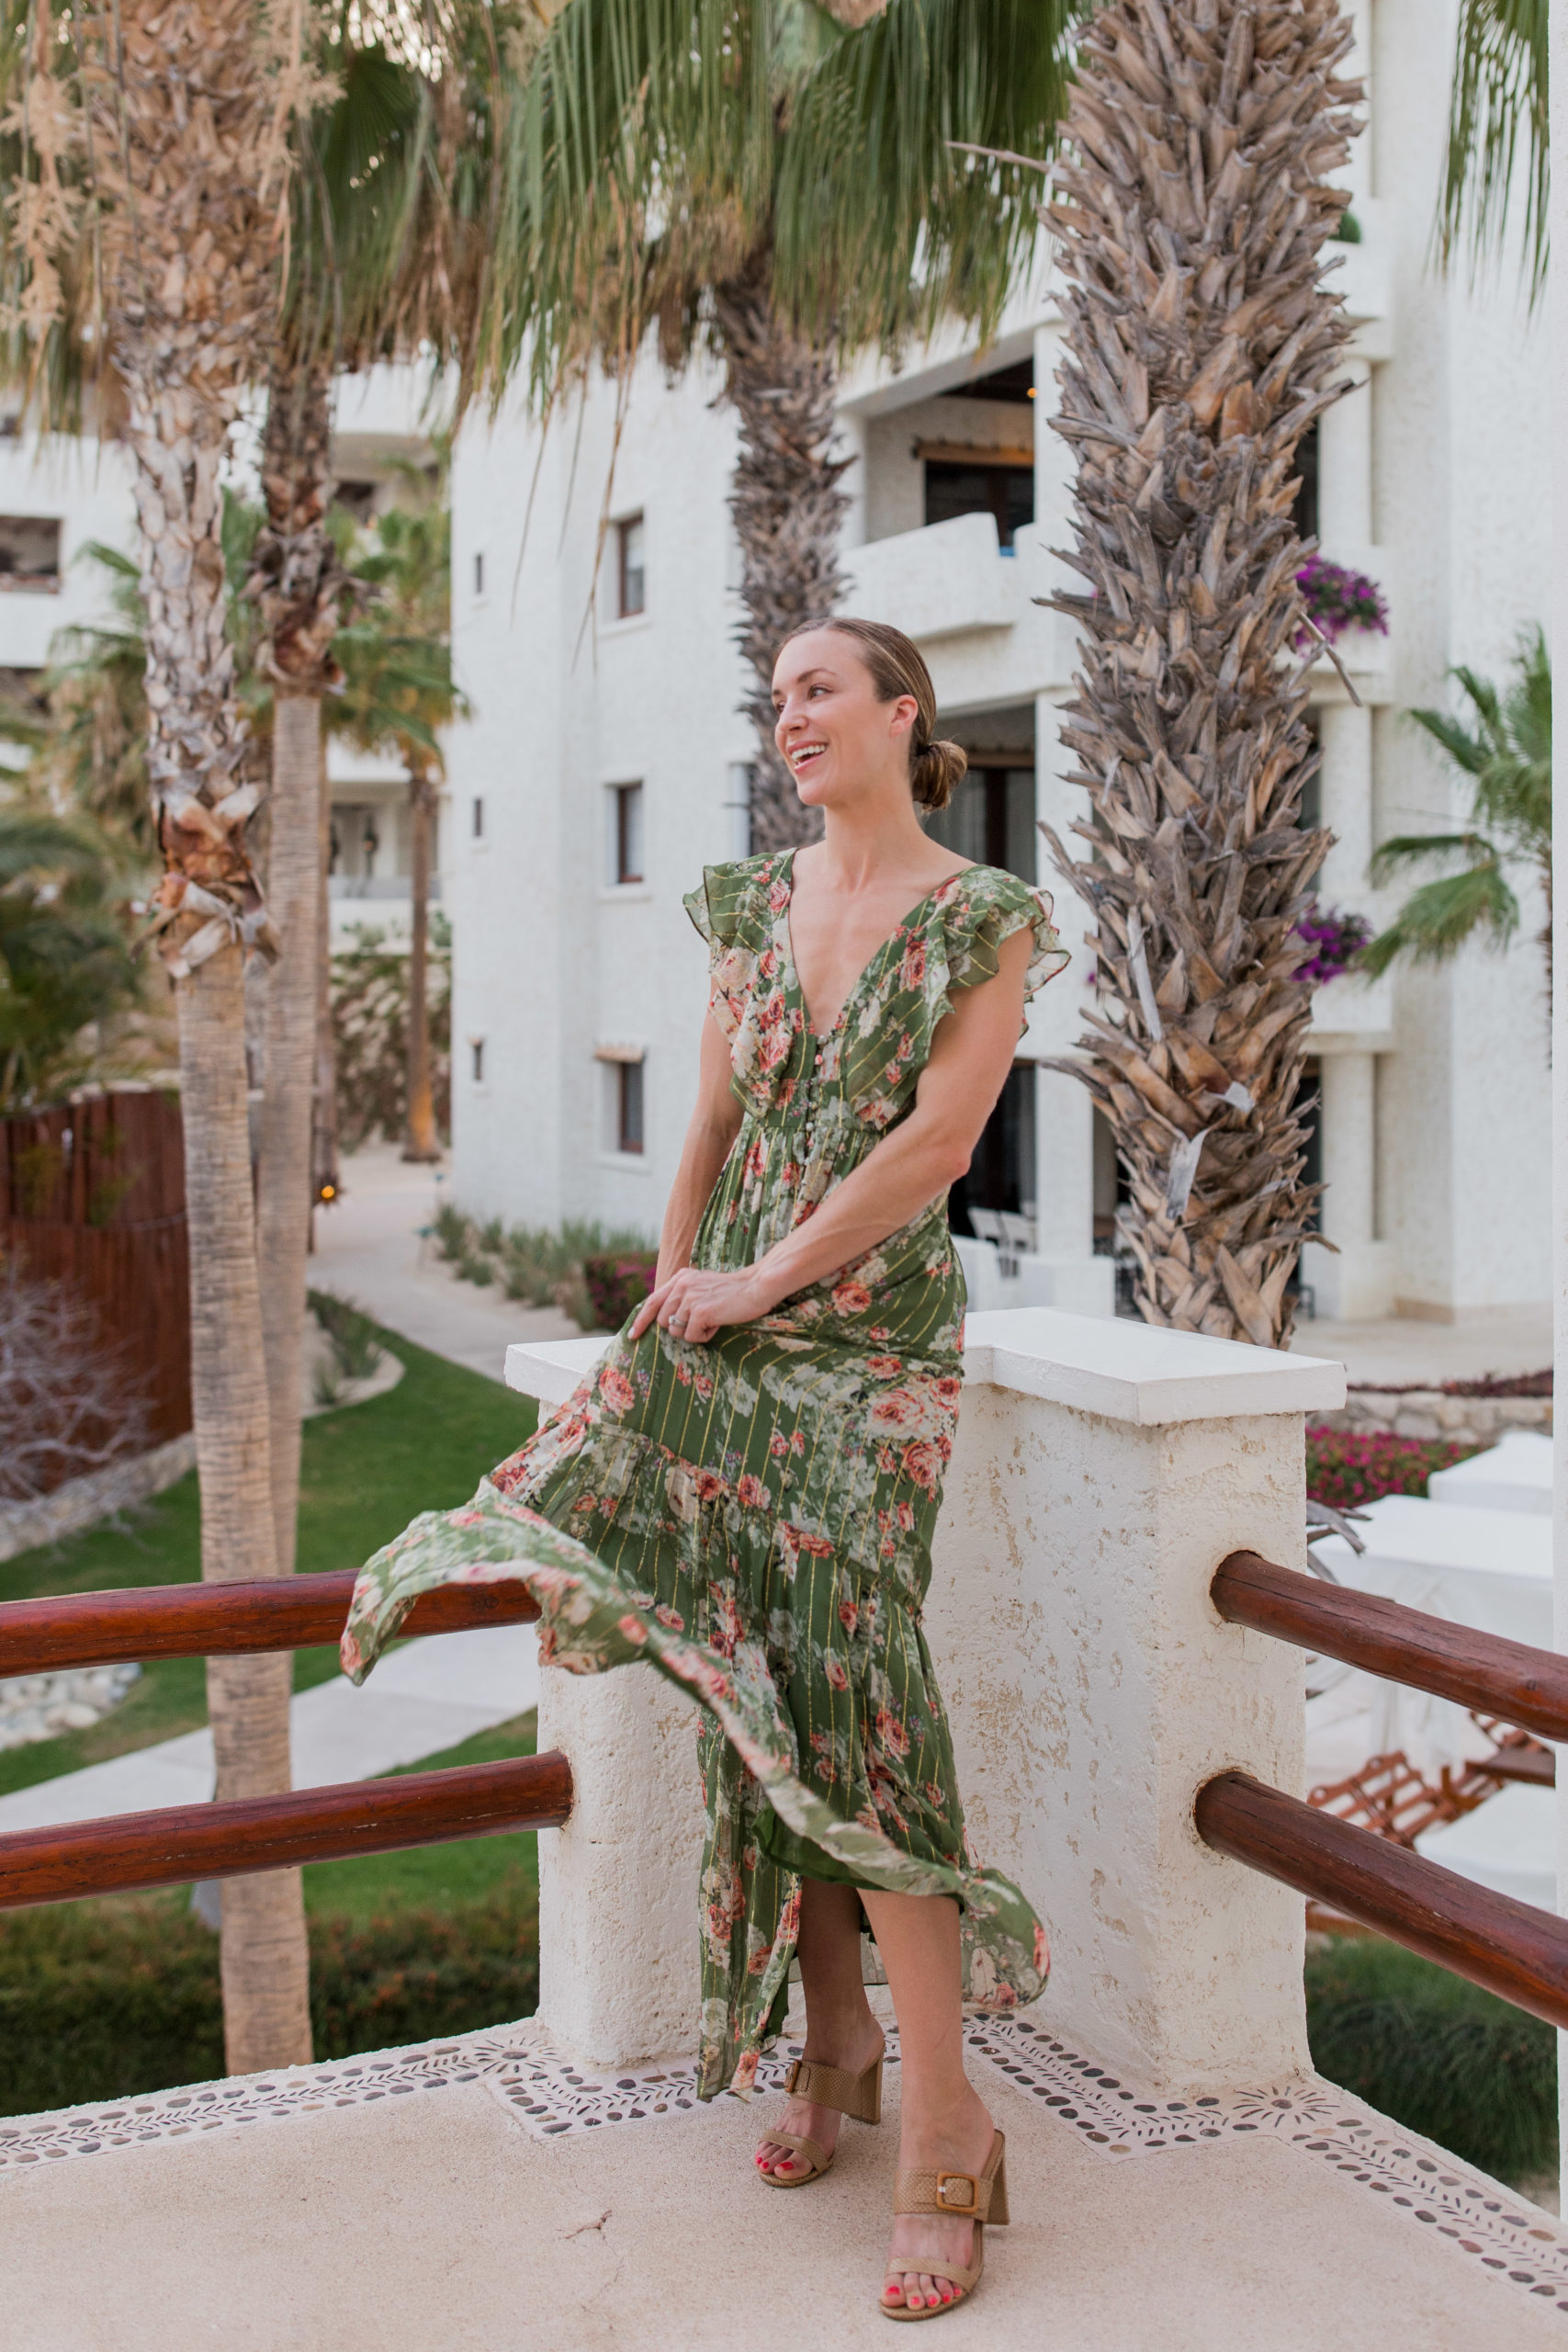 Beach vacation outfits to wear to dinner - green floral dress